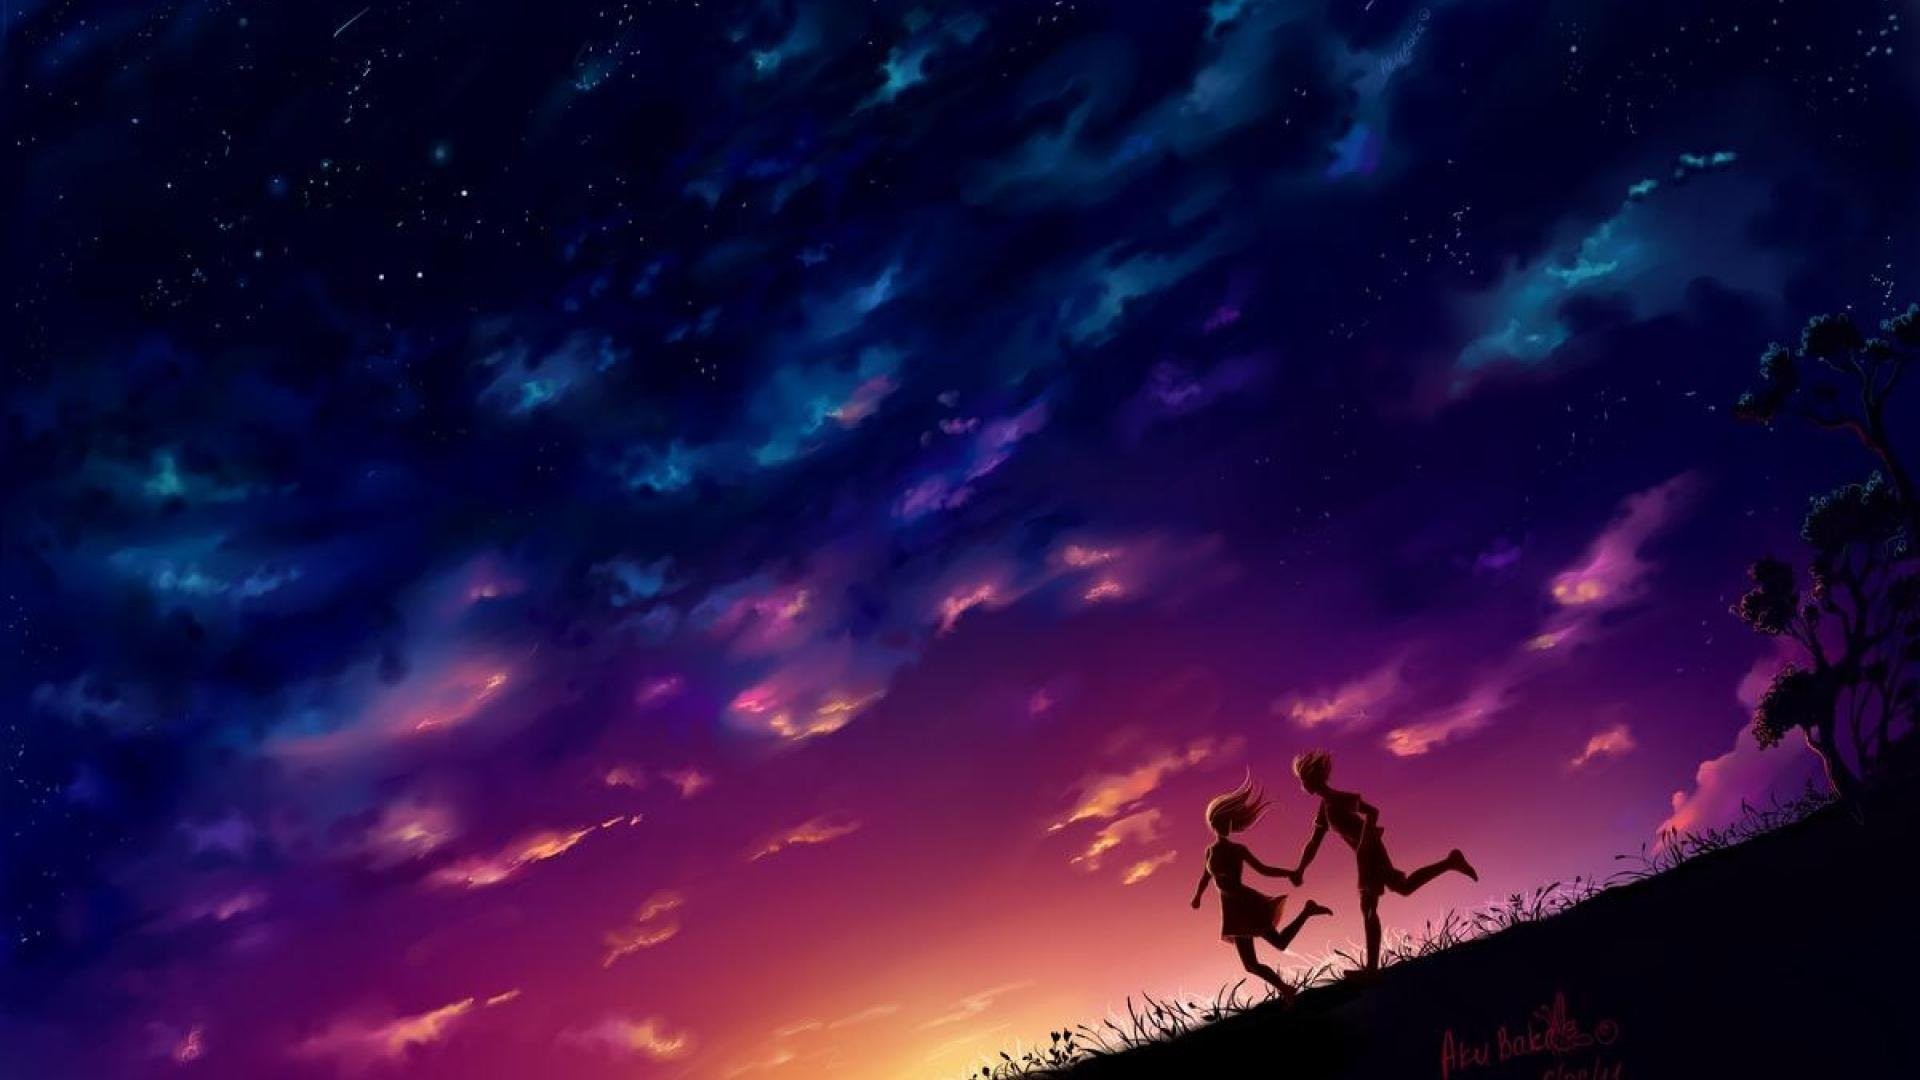 1920x1080 Romantic Cover Photo For Facebook